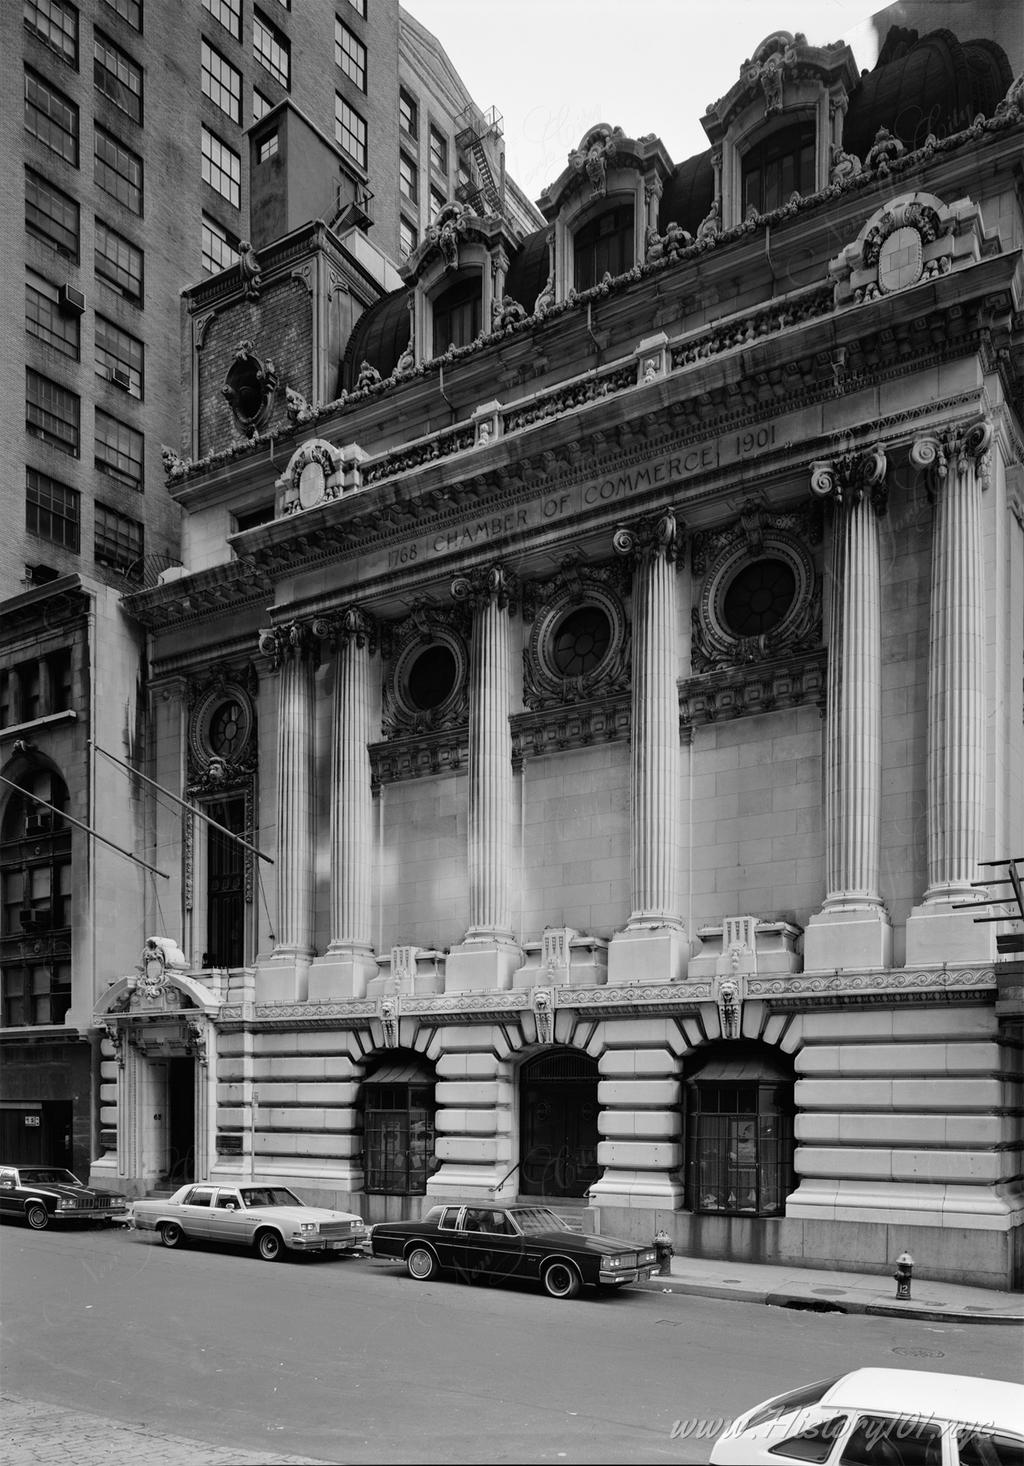 Photograph of the Chamber of Commerce Building, located on 65 Liberty Street.